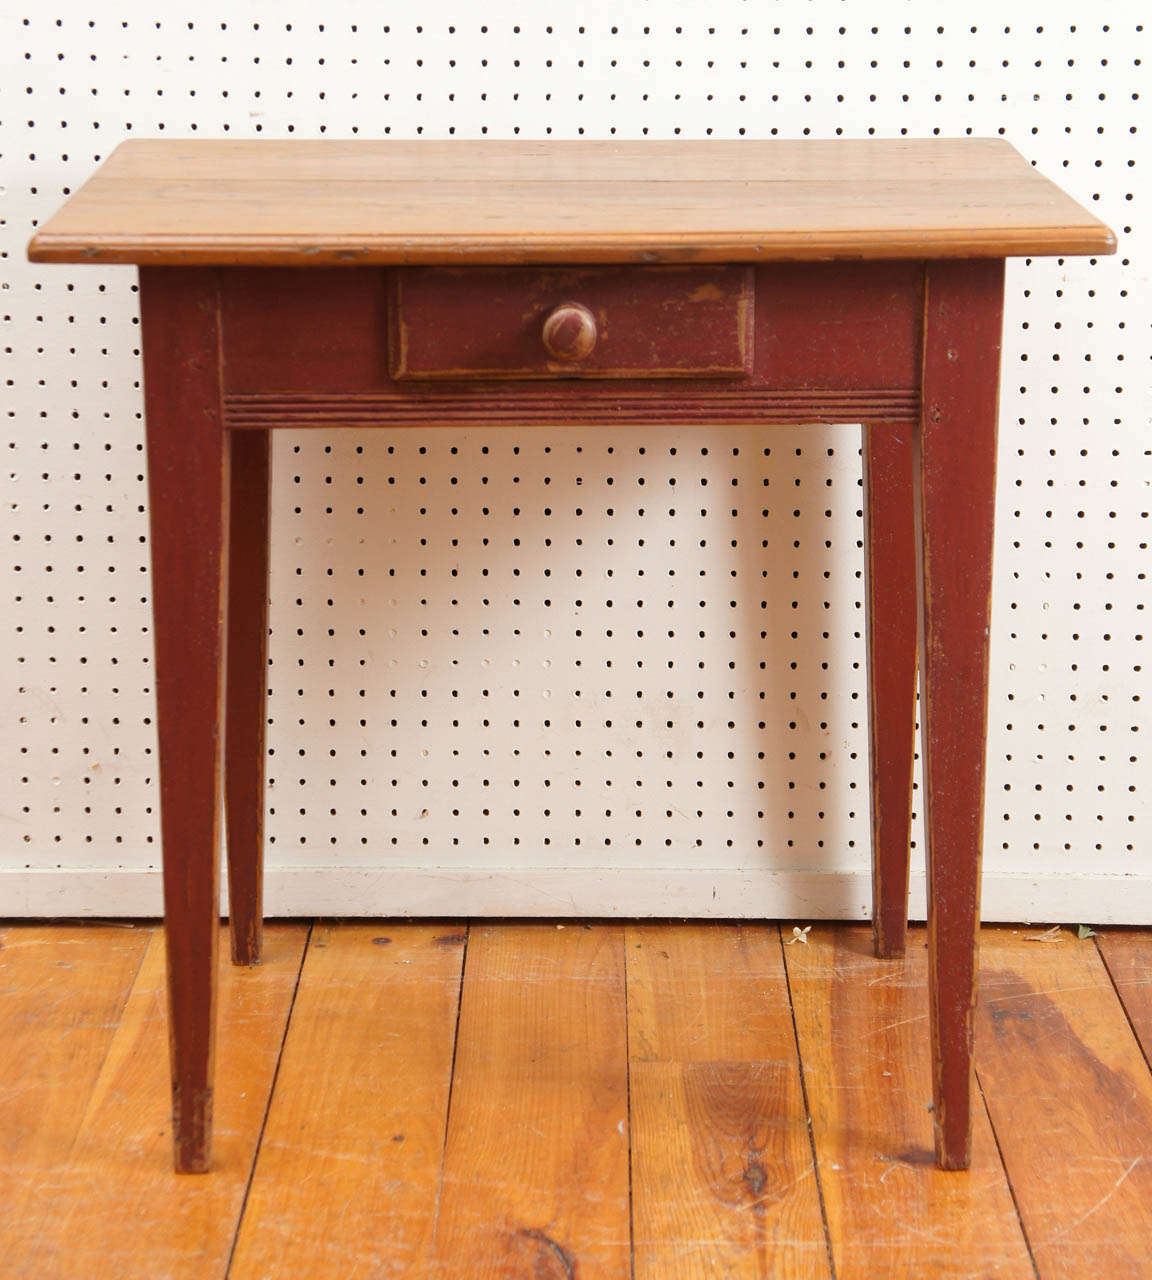 This nice little Canadian side table has a red base with tapered legs, reeding on the apron and a handy drawer on the front. The stained top accents the wonderful painted red base. A perfect side table or night stand.